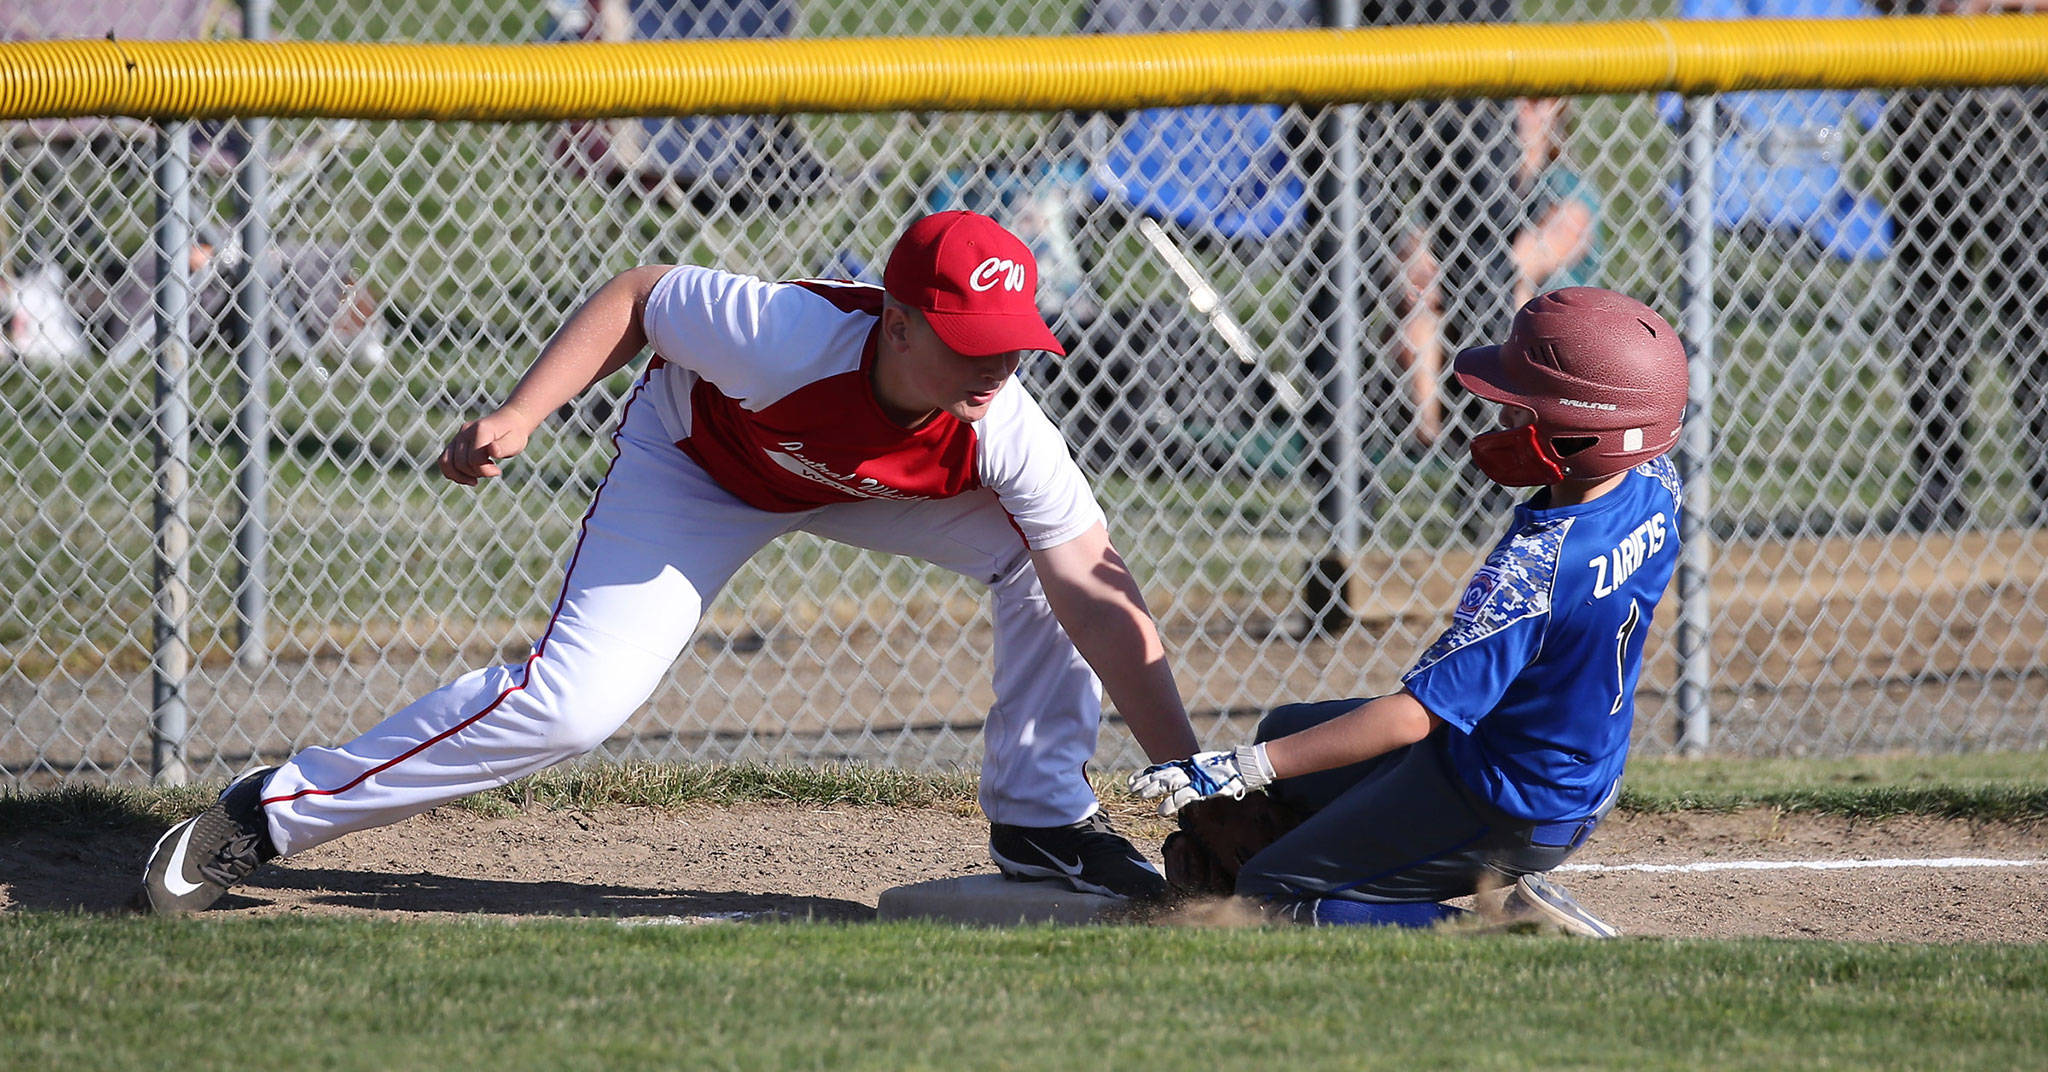 Third baseman Camden Glover tags out South Whidbey’s Alexander Zarifis trying to steal third base.(Photo by John Fisken)